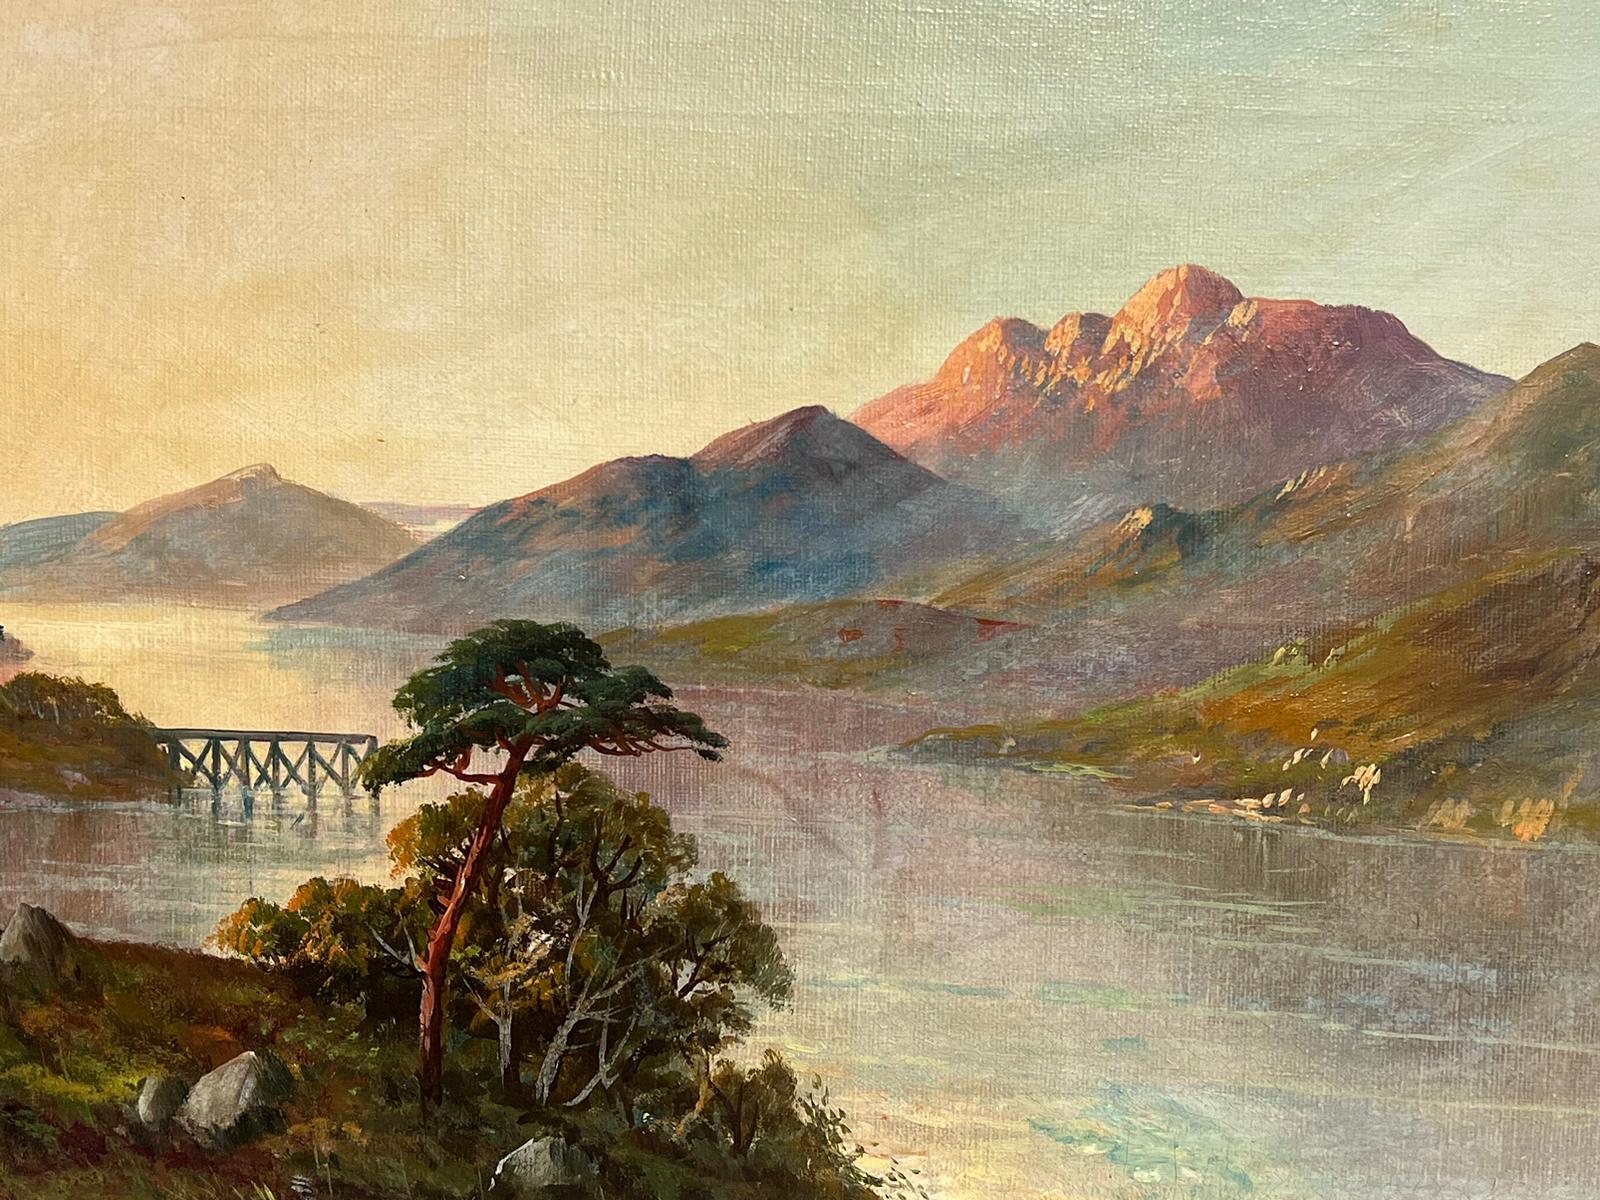 Artist/ School: F. E. Jamieson British (signed with the artists pseudonyn 'W. Richards'). 

Title: Luss, Loch Lomond (Scottish Highlands)

Medium: Oil on canvas, framed

Size:
framed: 13.5 x 21.5 inches
canvas : 12 x 20 inches

Provenance: from a